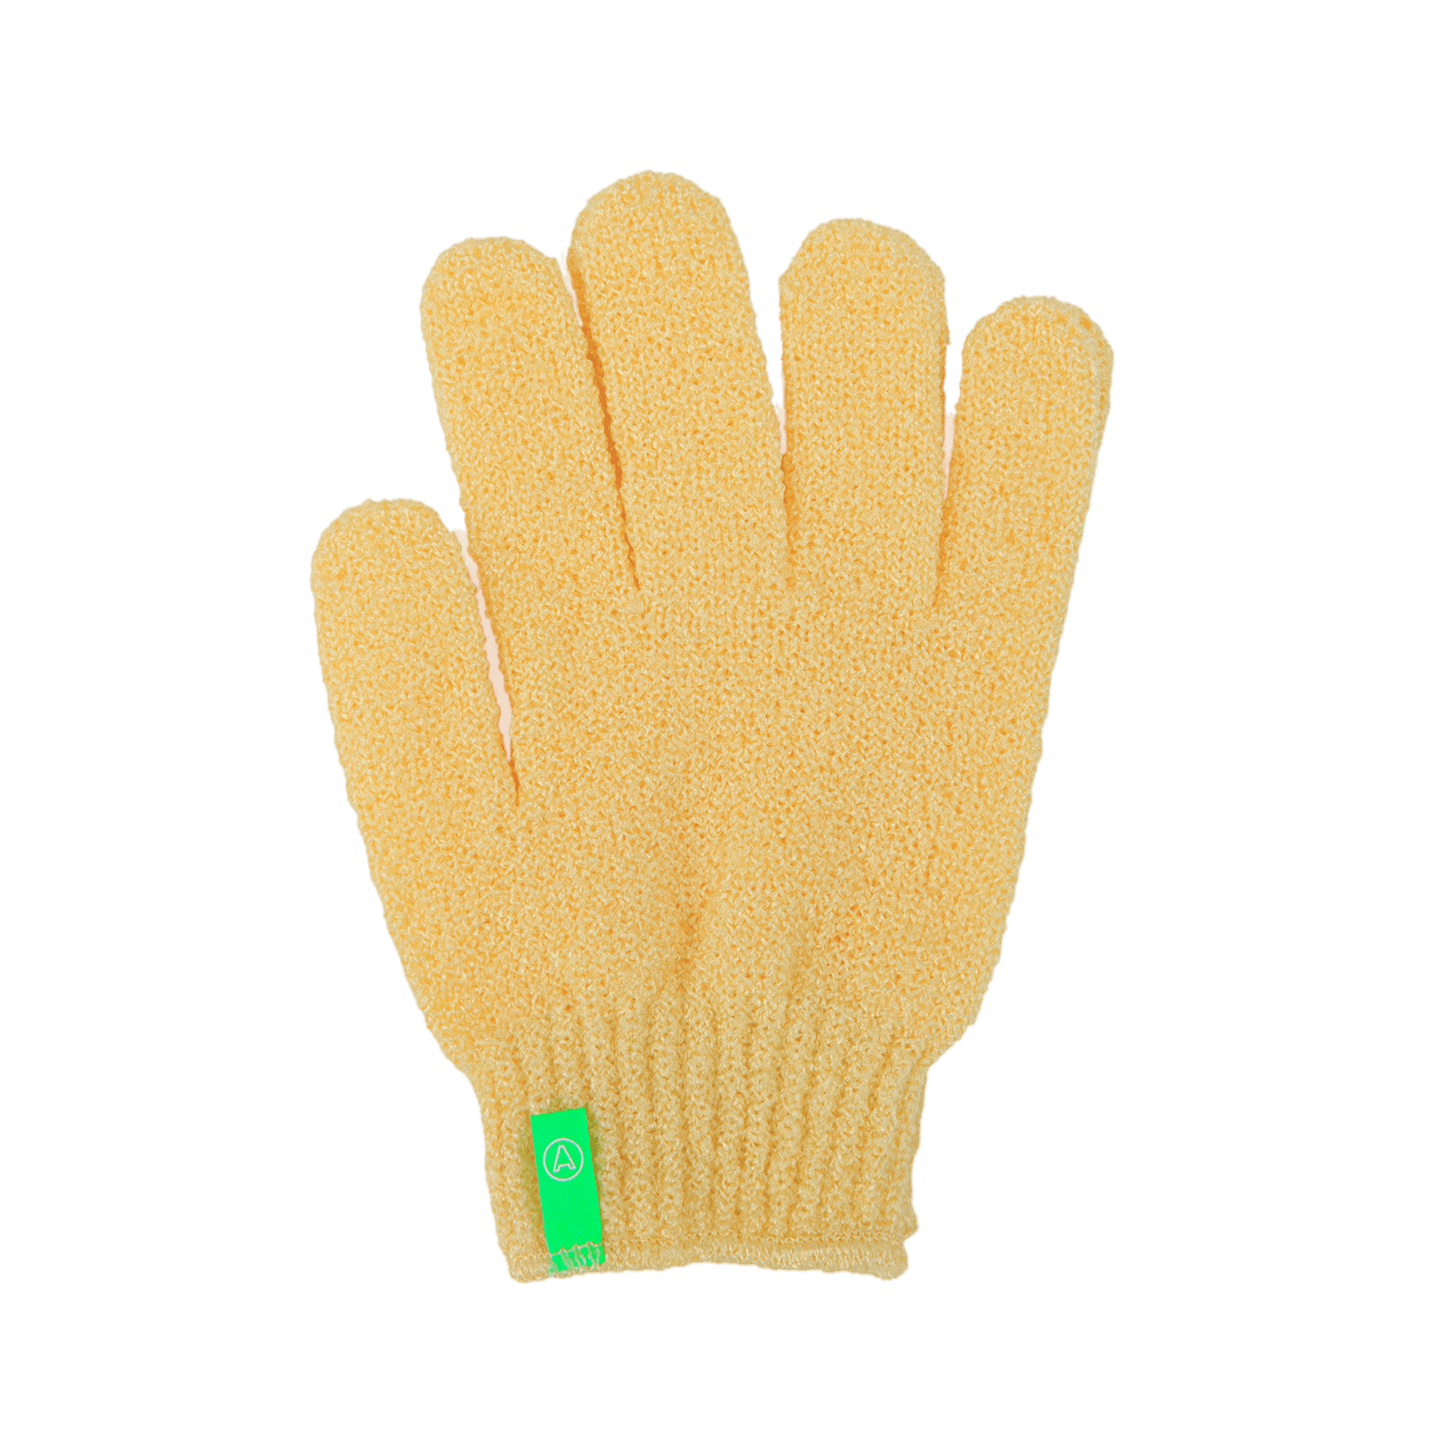 Afterspa Exfoliating Gloves _ to exfoliate the body. 